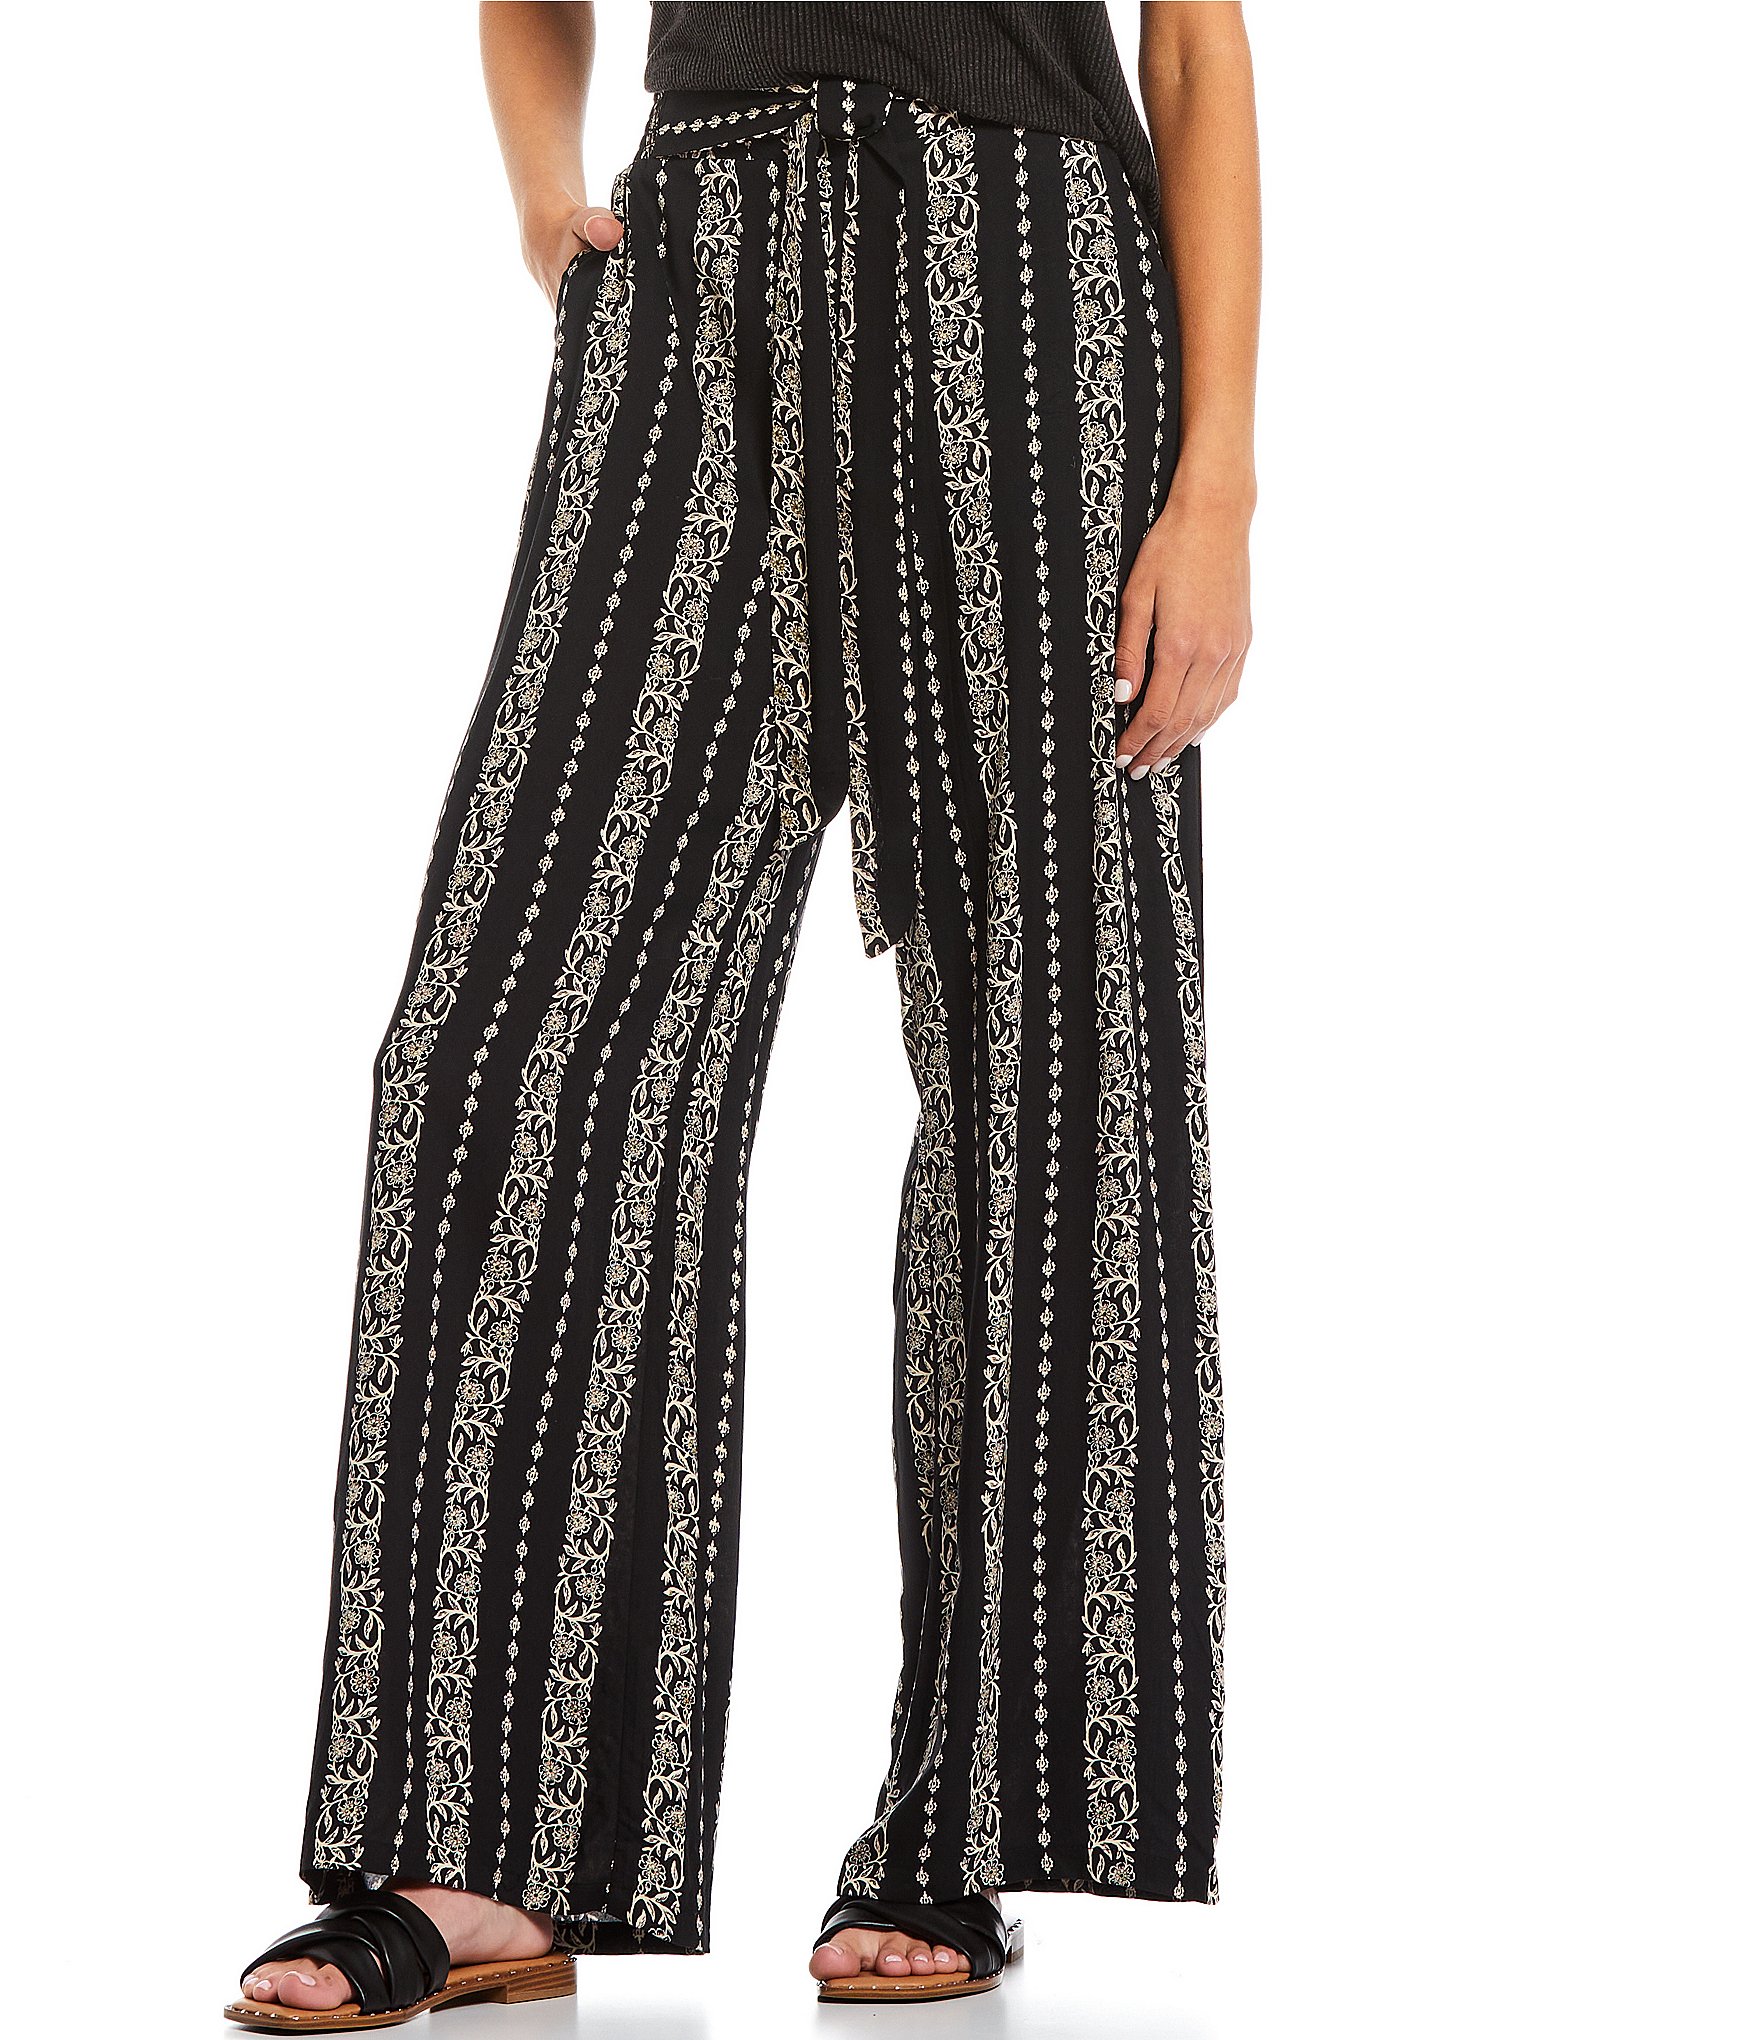 Women's Angie Pants − Sale: at $26.07+